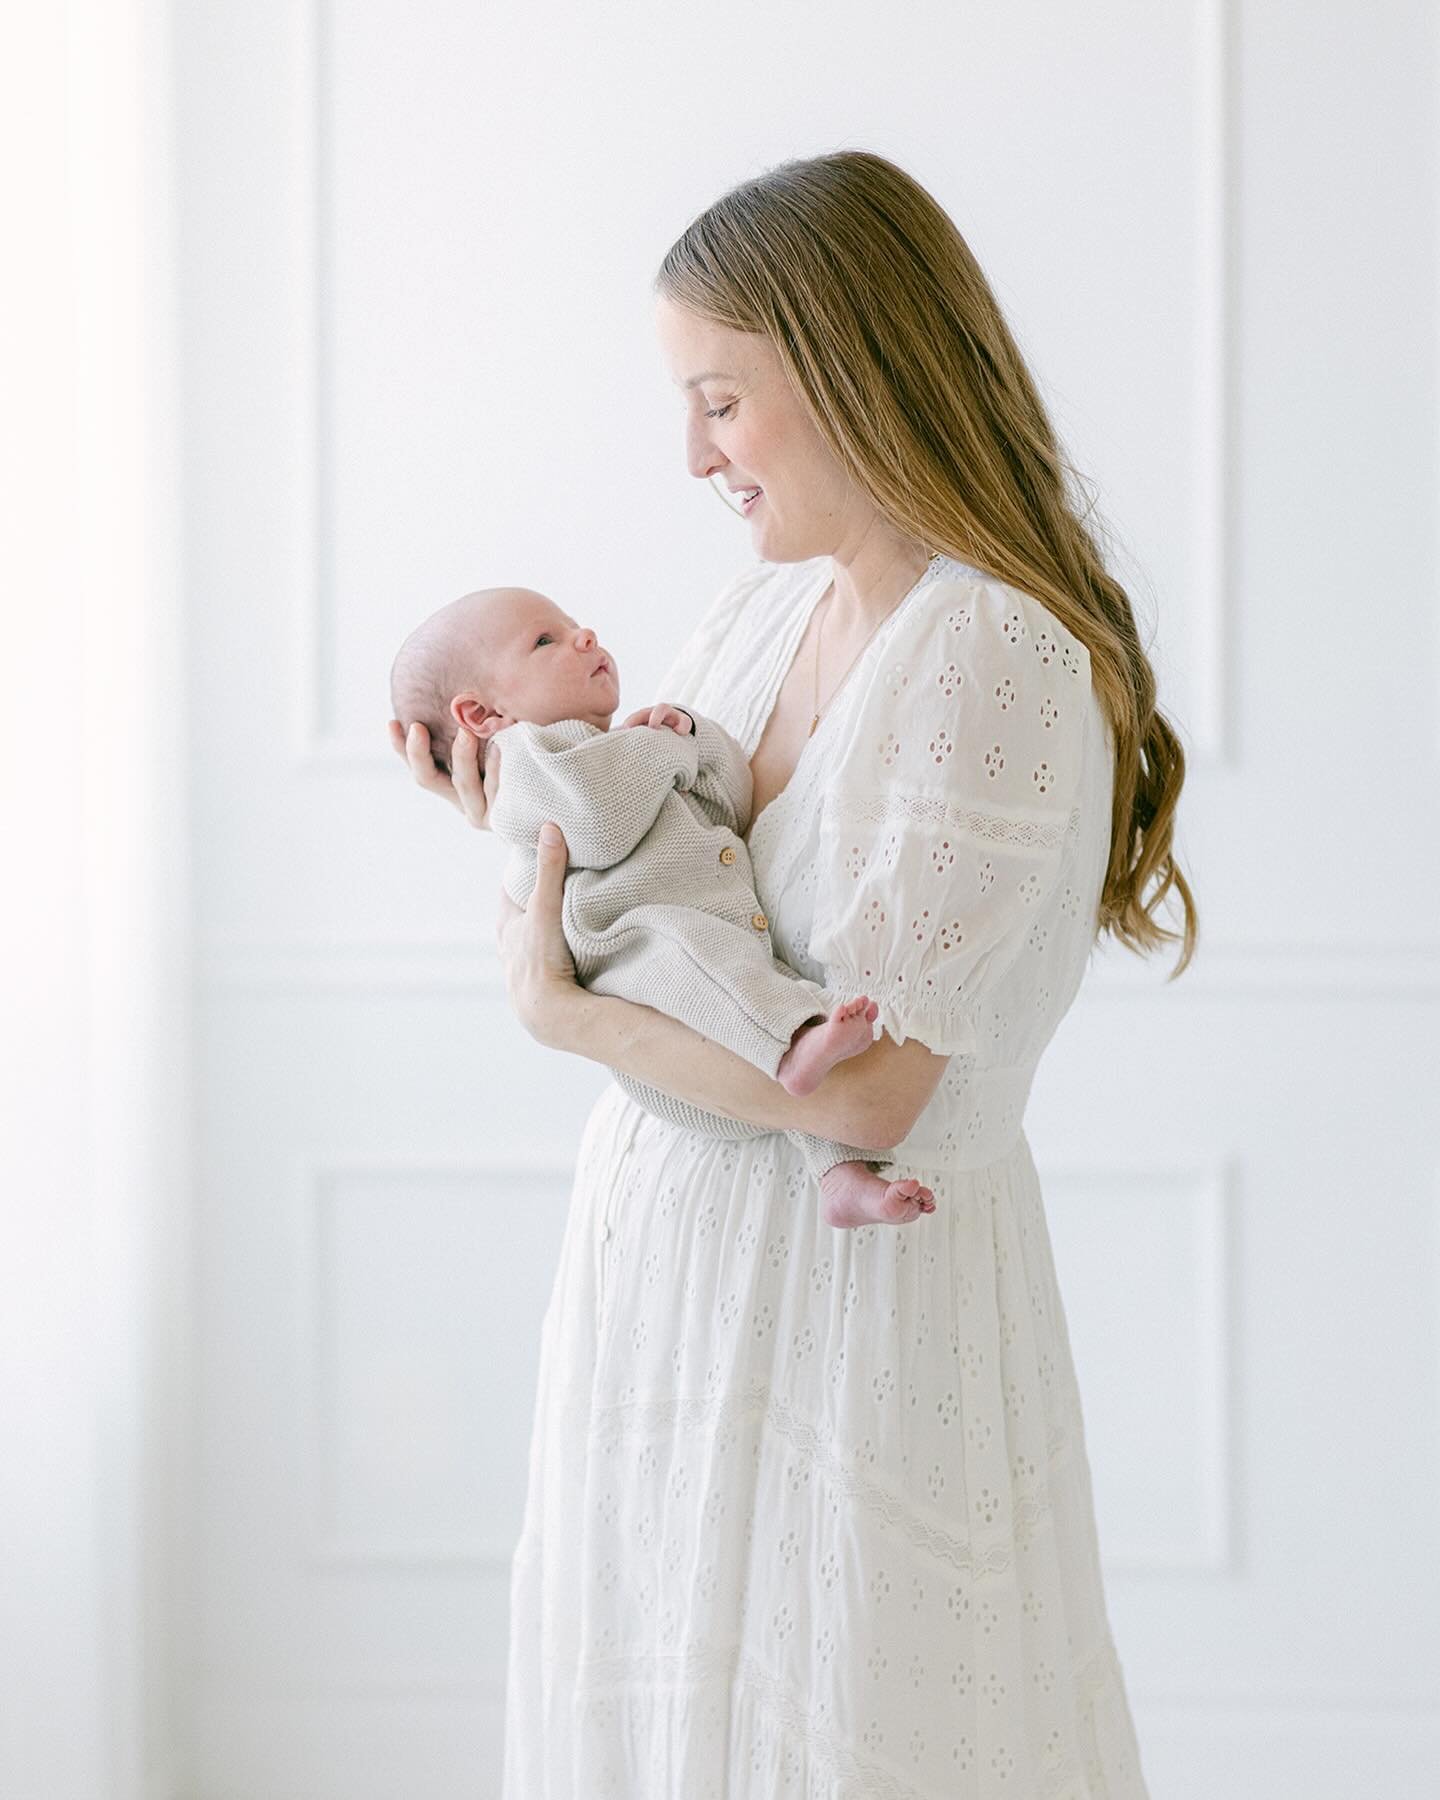 I will never ever get tired of photographing moms looking at their babies 💕

PS - I added 2 more spots for motherhood minis on April 27. Link in bio to book.